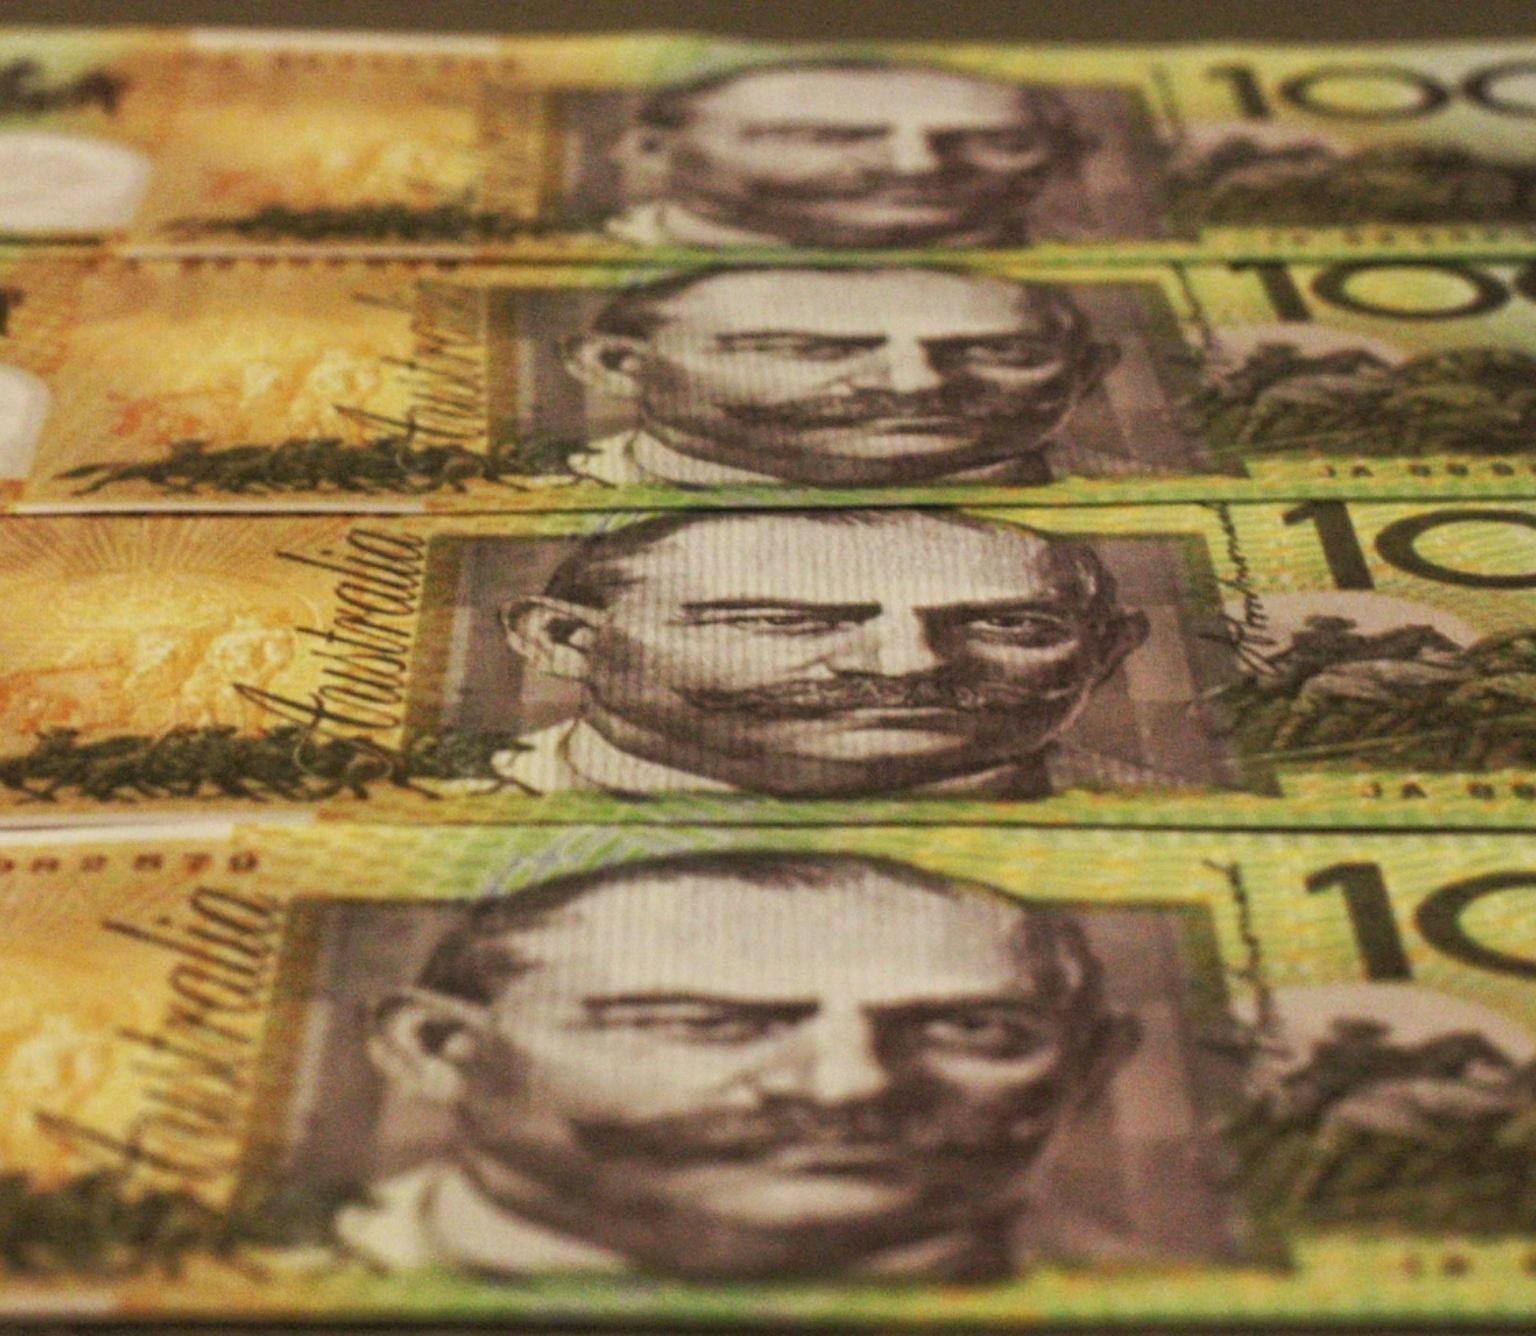 line of Australian hundred dollar bills are pictured. The bills are green and yellow and feature a black and white drawing of the face of a man